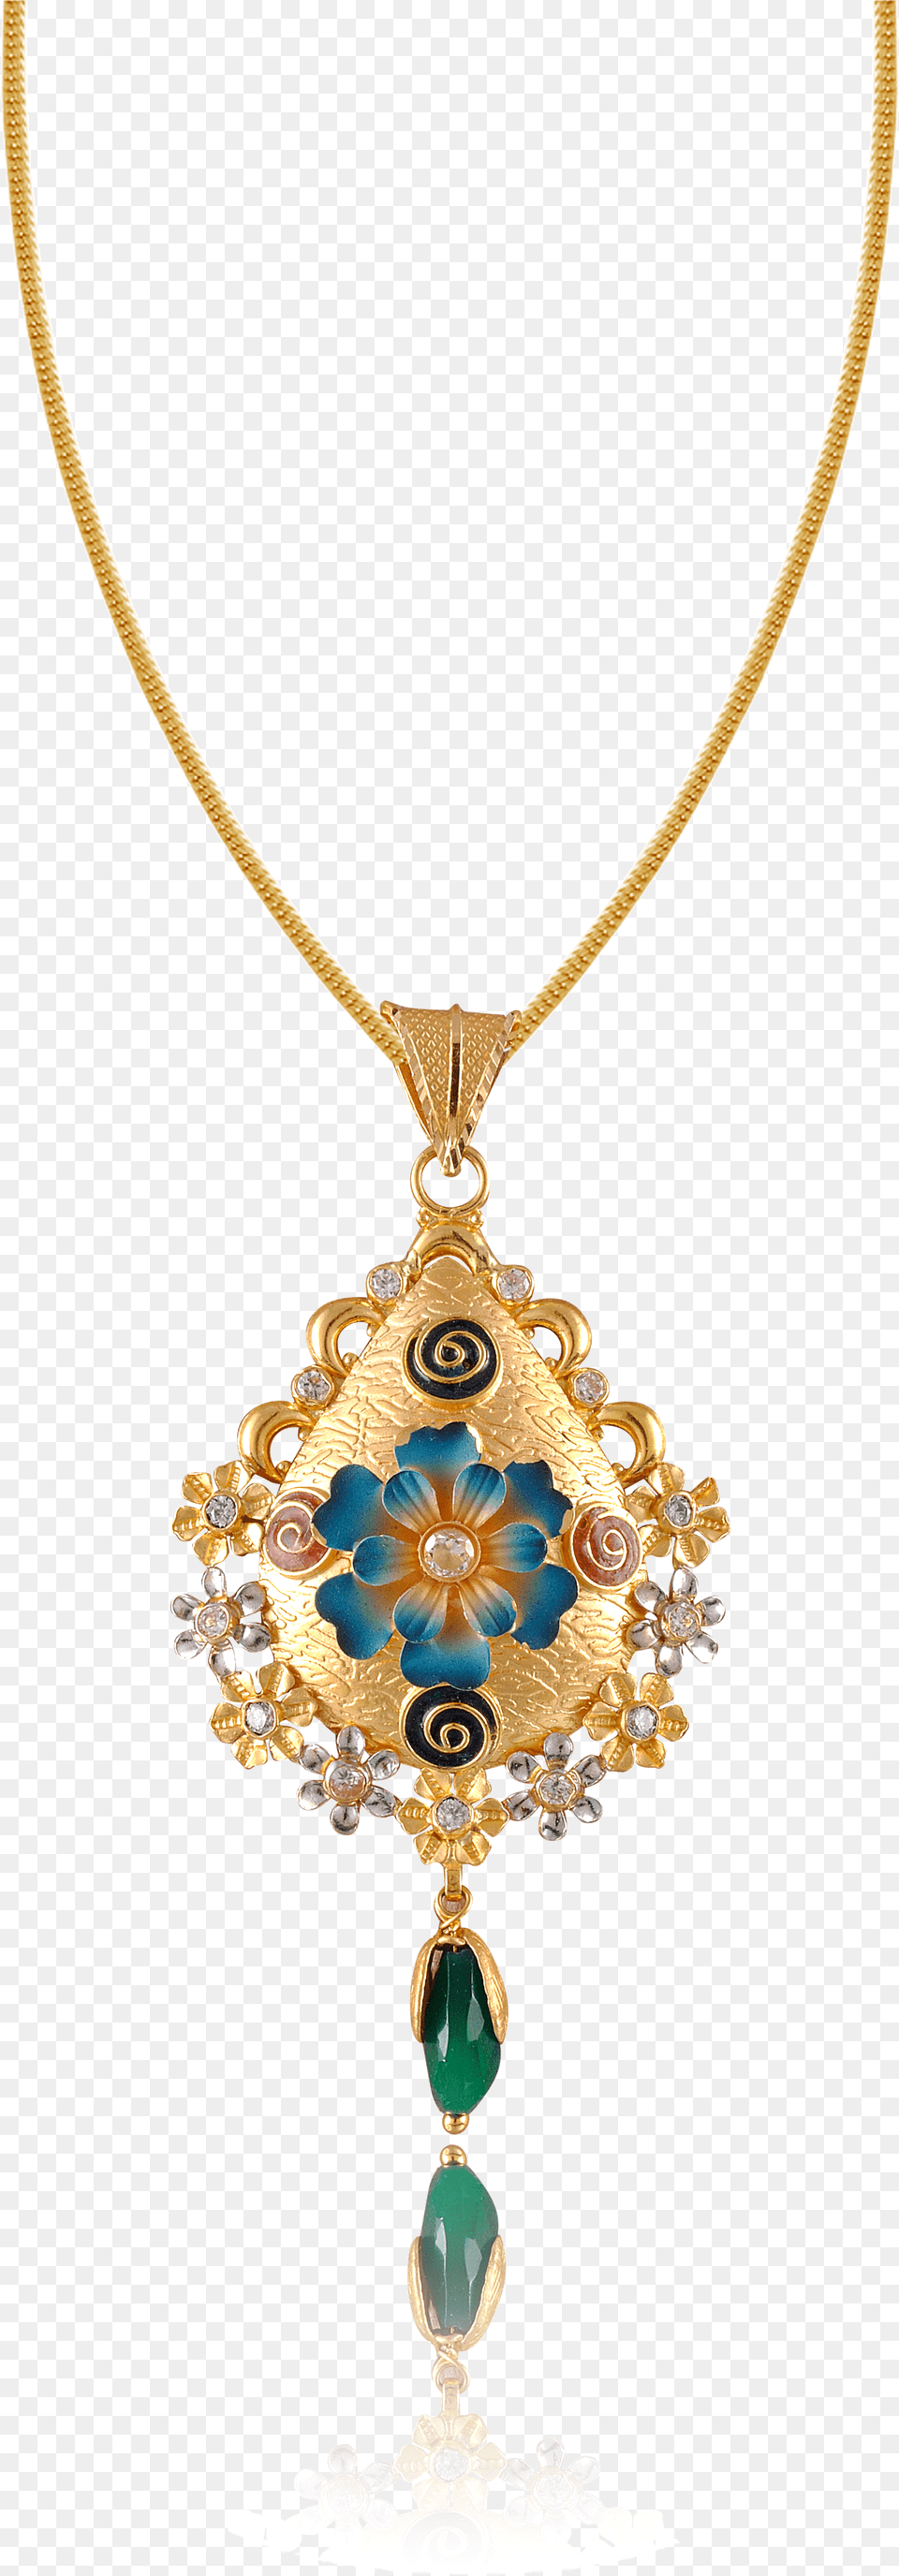 Locket, Accessories, Jewelry, Necklace, Pendant Png